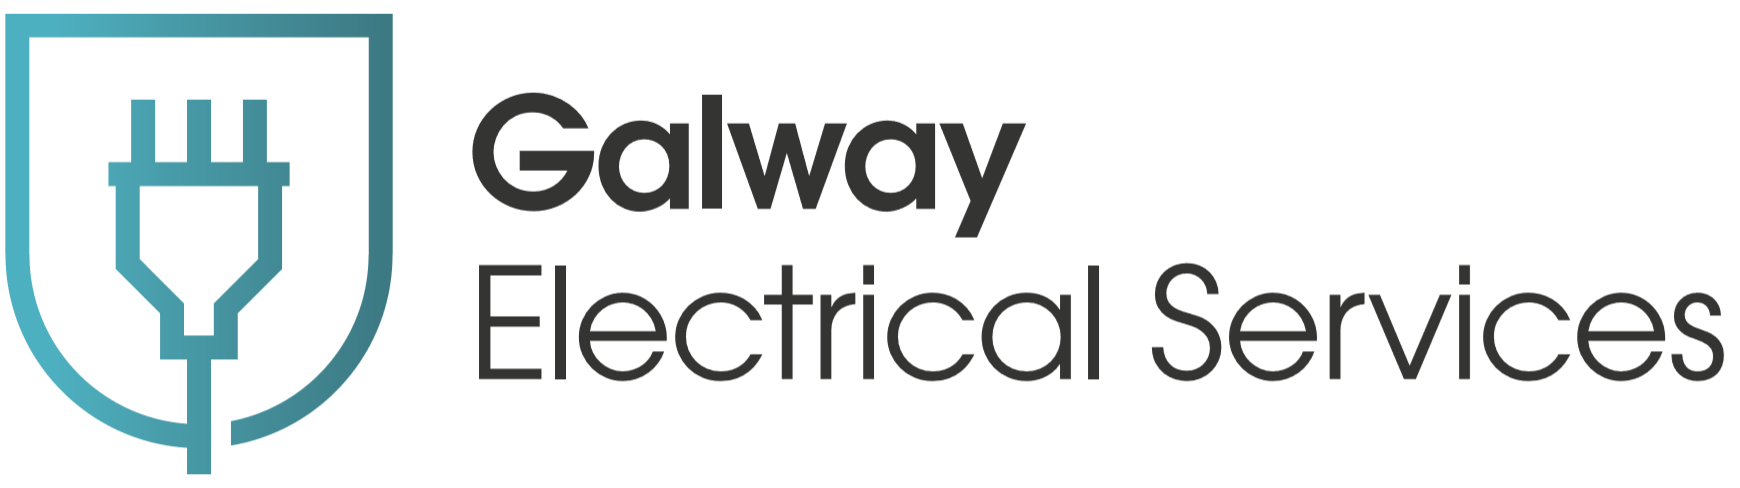 Galway Electrical Services